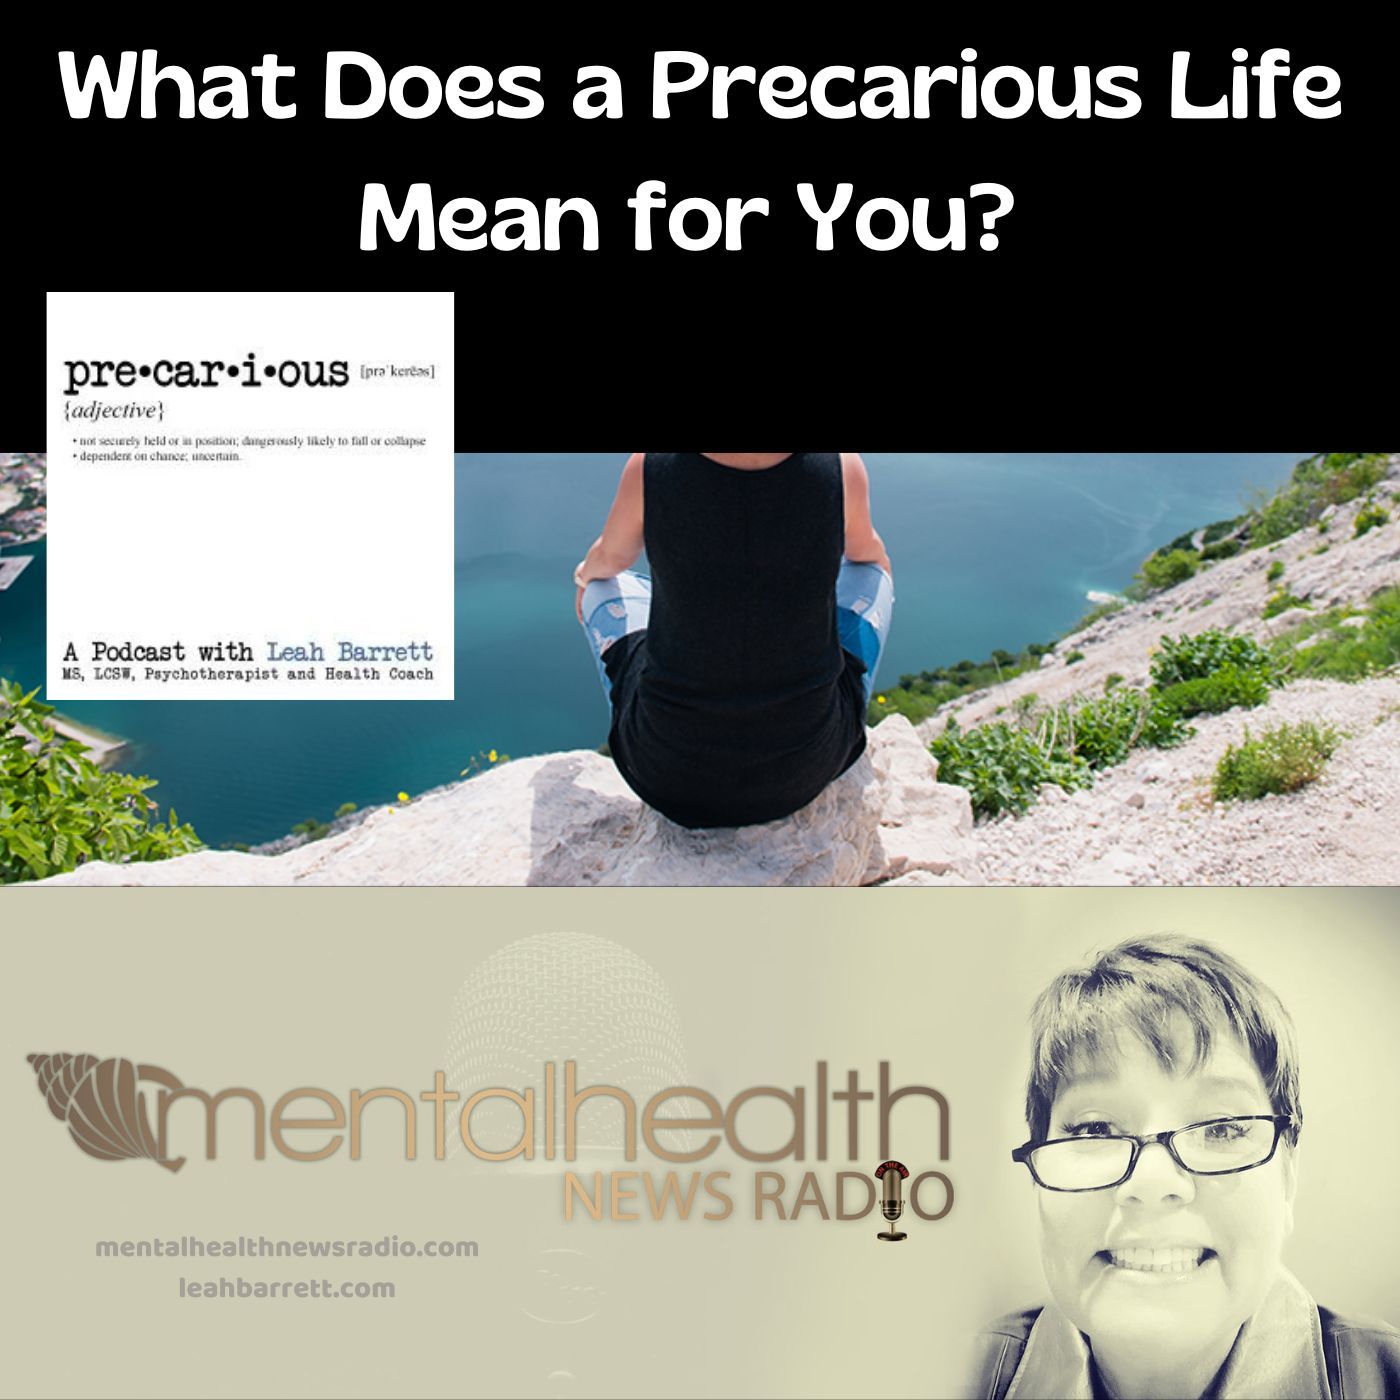 Mental Health News Radio - What Does a Precarious Life Mean for You?